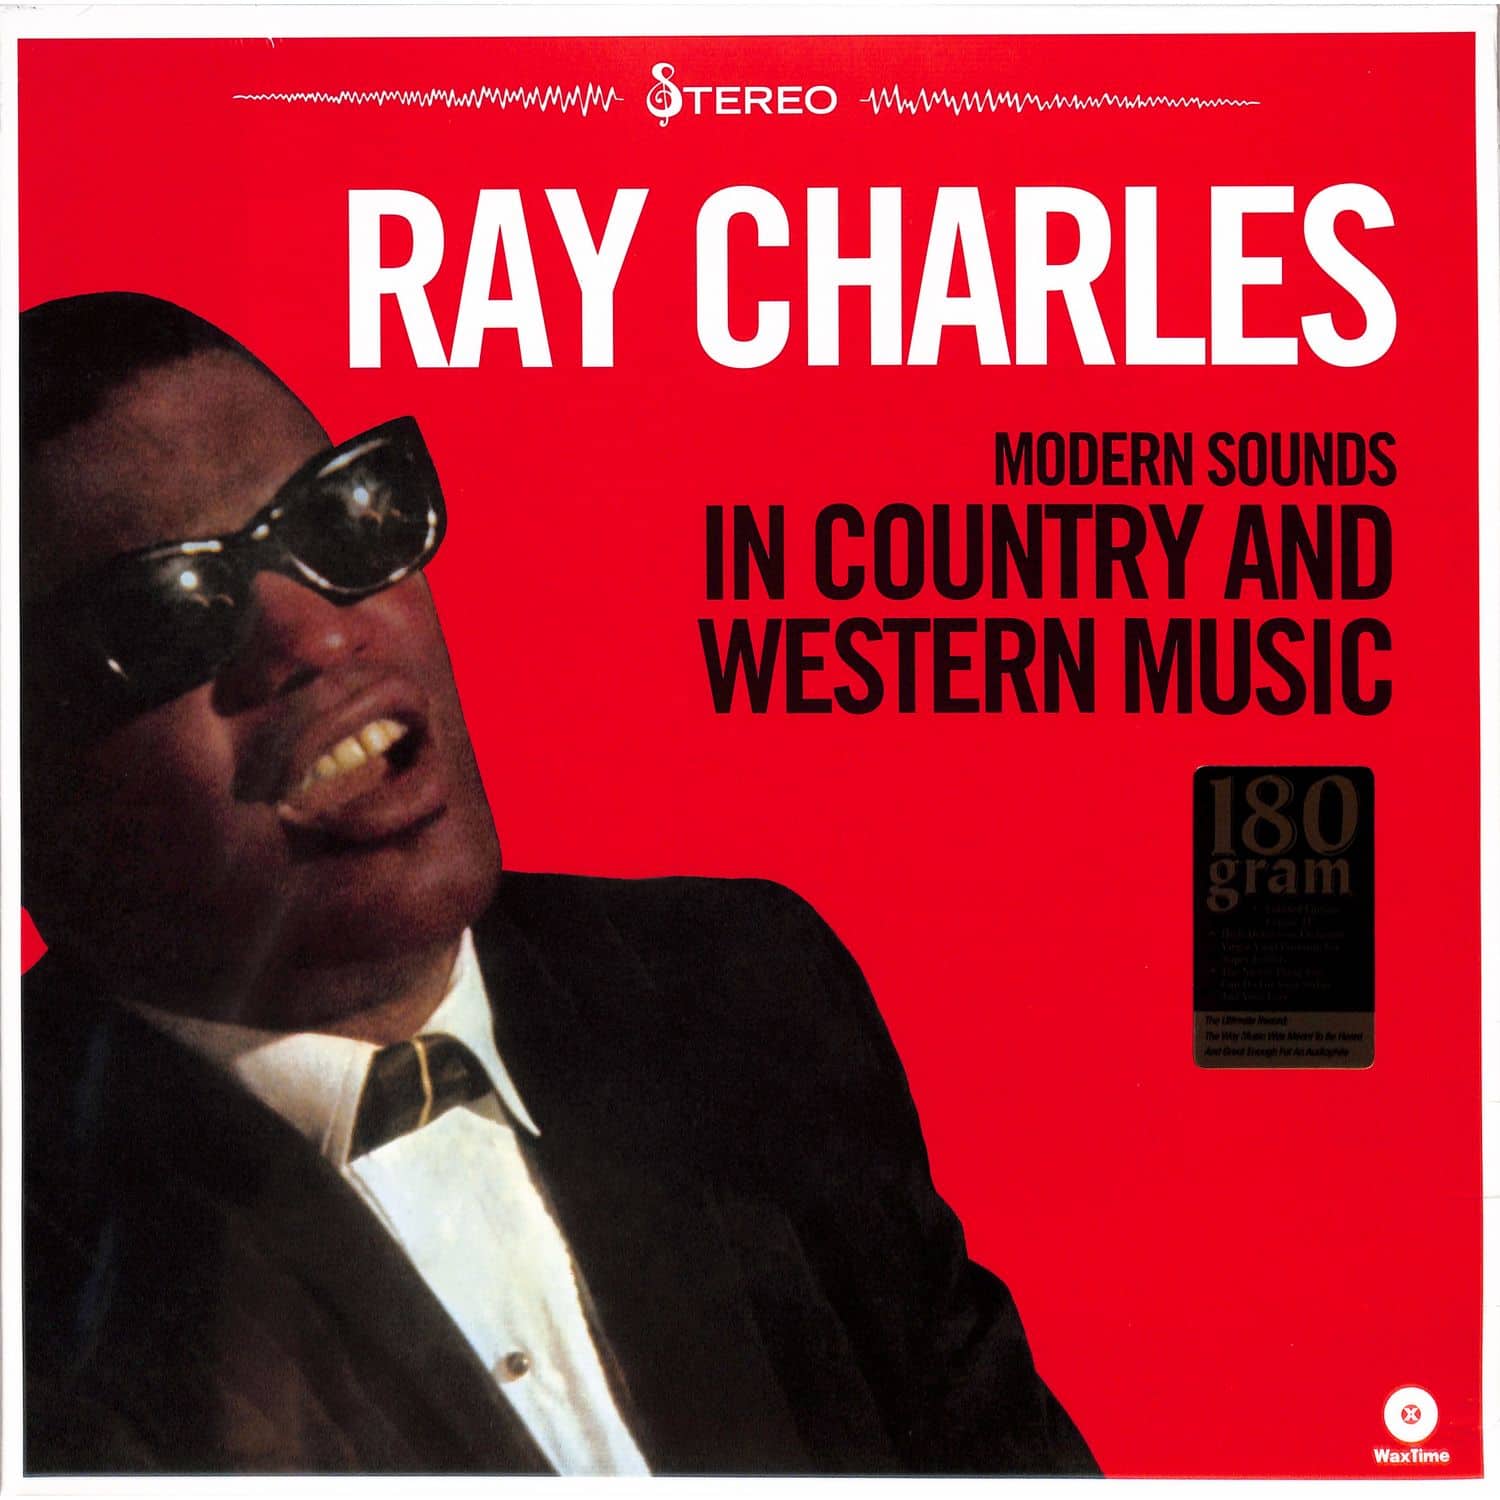 Ray Charles - MODERN SOUNDS IN COUNTRY & WESTERN MUSIC 